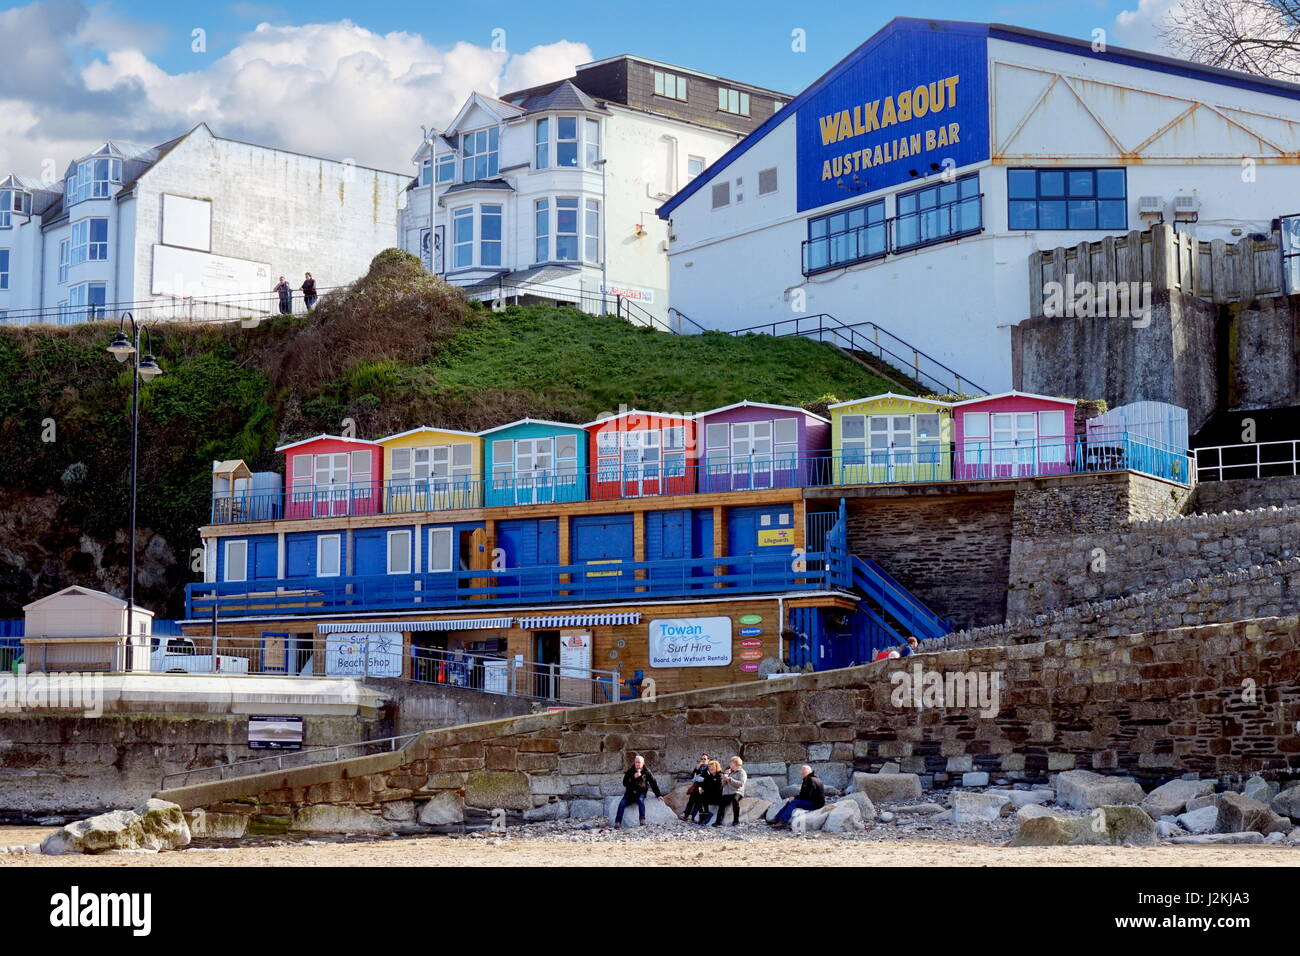 Newquay, Cornwall, UK - April 1 2017: Colourful beach huts above Newquay beach, in front of the Walkabout Australian Bar - unidentified people enjoy t Stock Photo